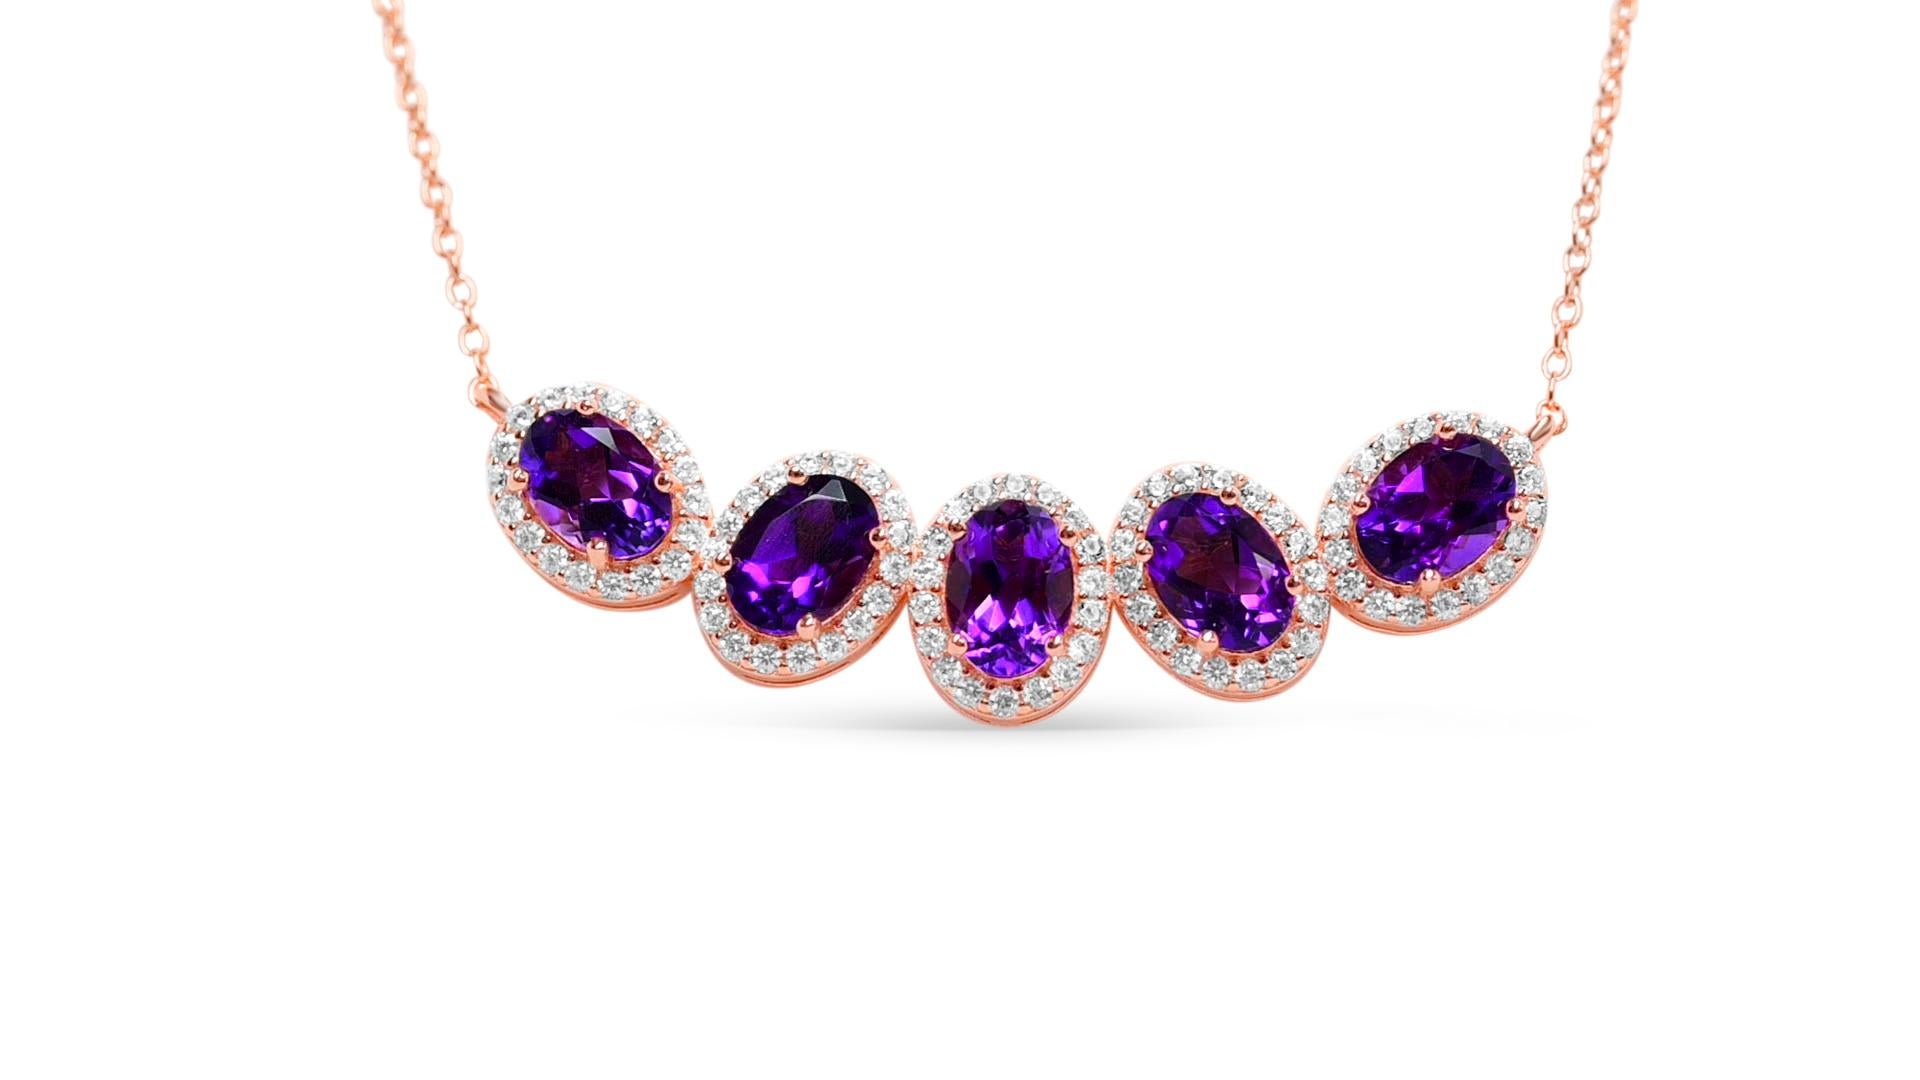 Oval Cut 3.61 Ctw Amethyst Bridal Necklace Rose Gold Plated 925 Sterling Silver Necklace For Sale